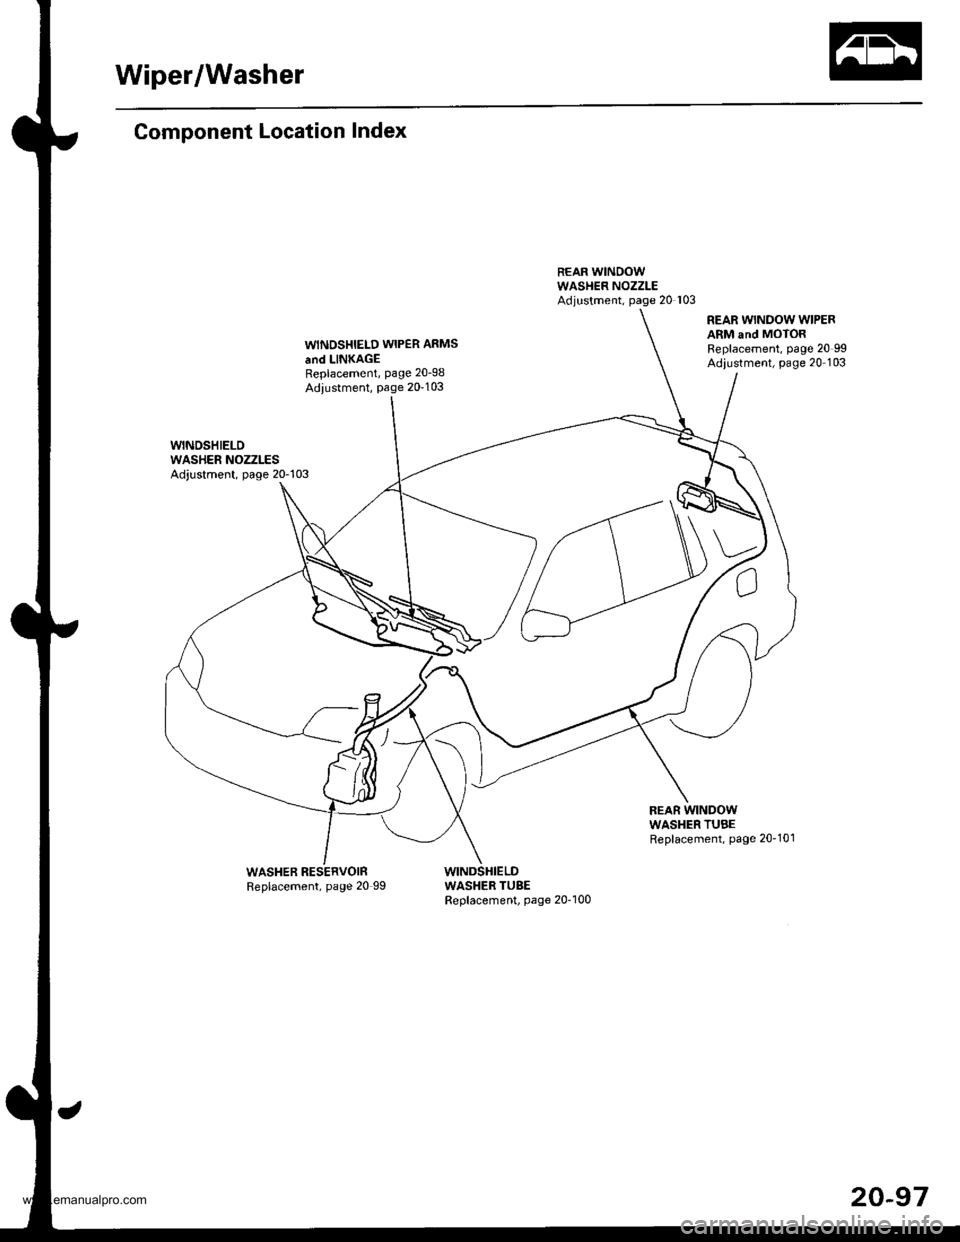 HONDA CR-V 2000 RD1-RD3 / 1.G Workshop Manual 
Wiper/Washer
Component Location Index
WINOSHIELD WIPER ARMS
and LINKAGEReplacement, page 20-98
Adiustment, Page 20-103
REAR WINDOW WIPERARM and MOTORReplacement, page 20 99Adiustment, page 20 103
WAS